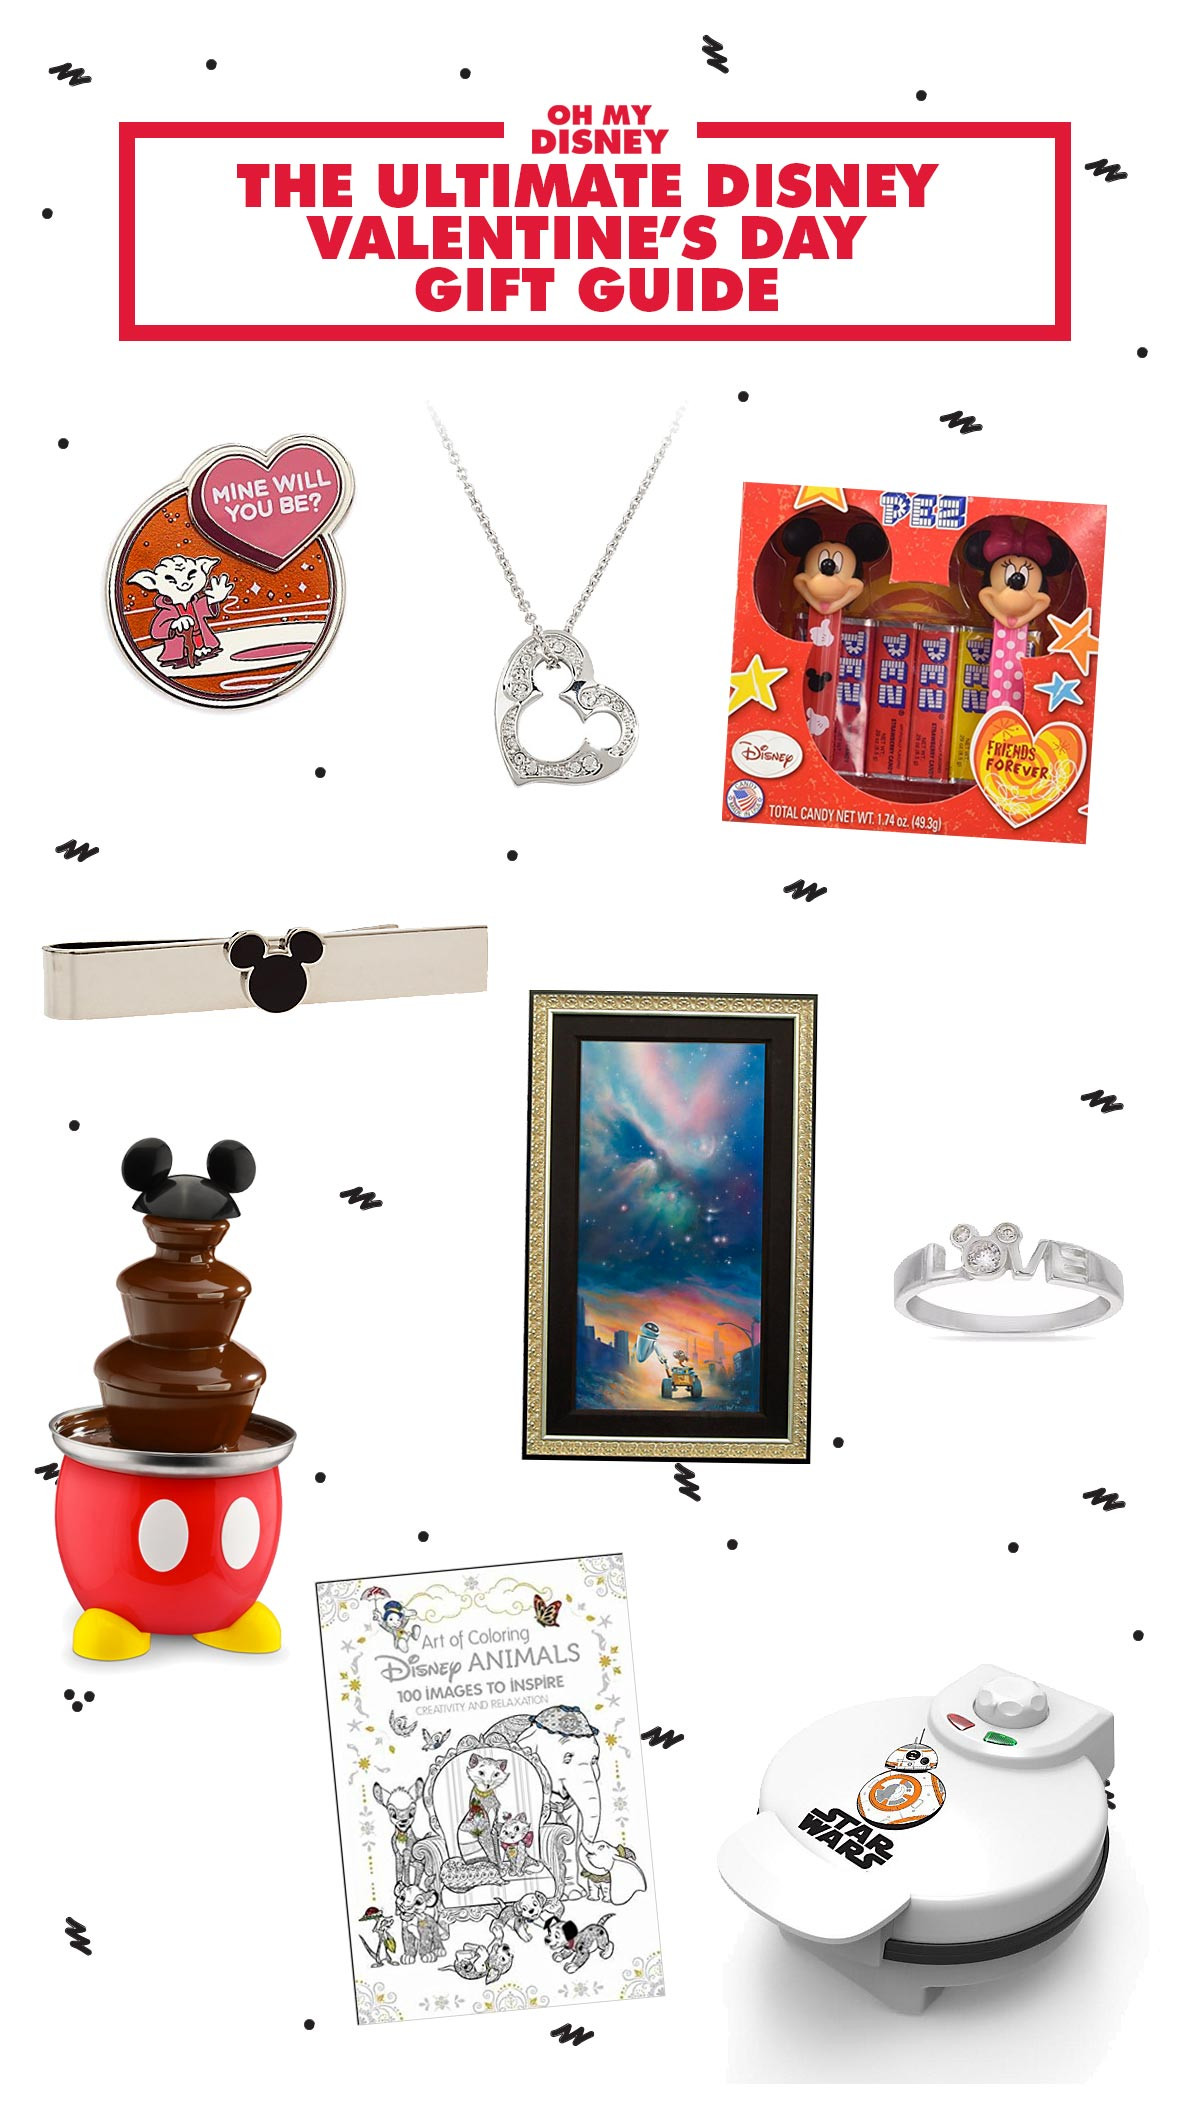 Disney Valentines Day Gifts
 The Ultimate Disney Valentine’s Day Gift Guide For Your